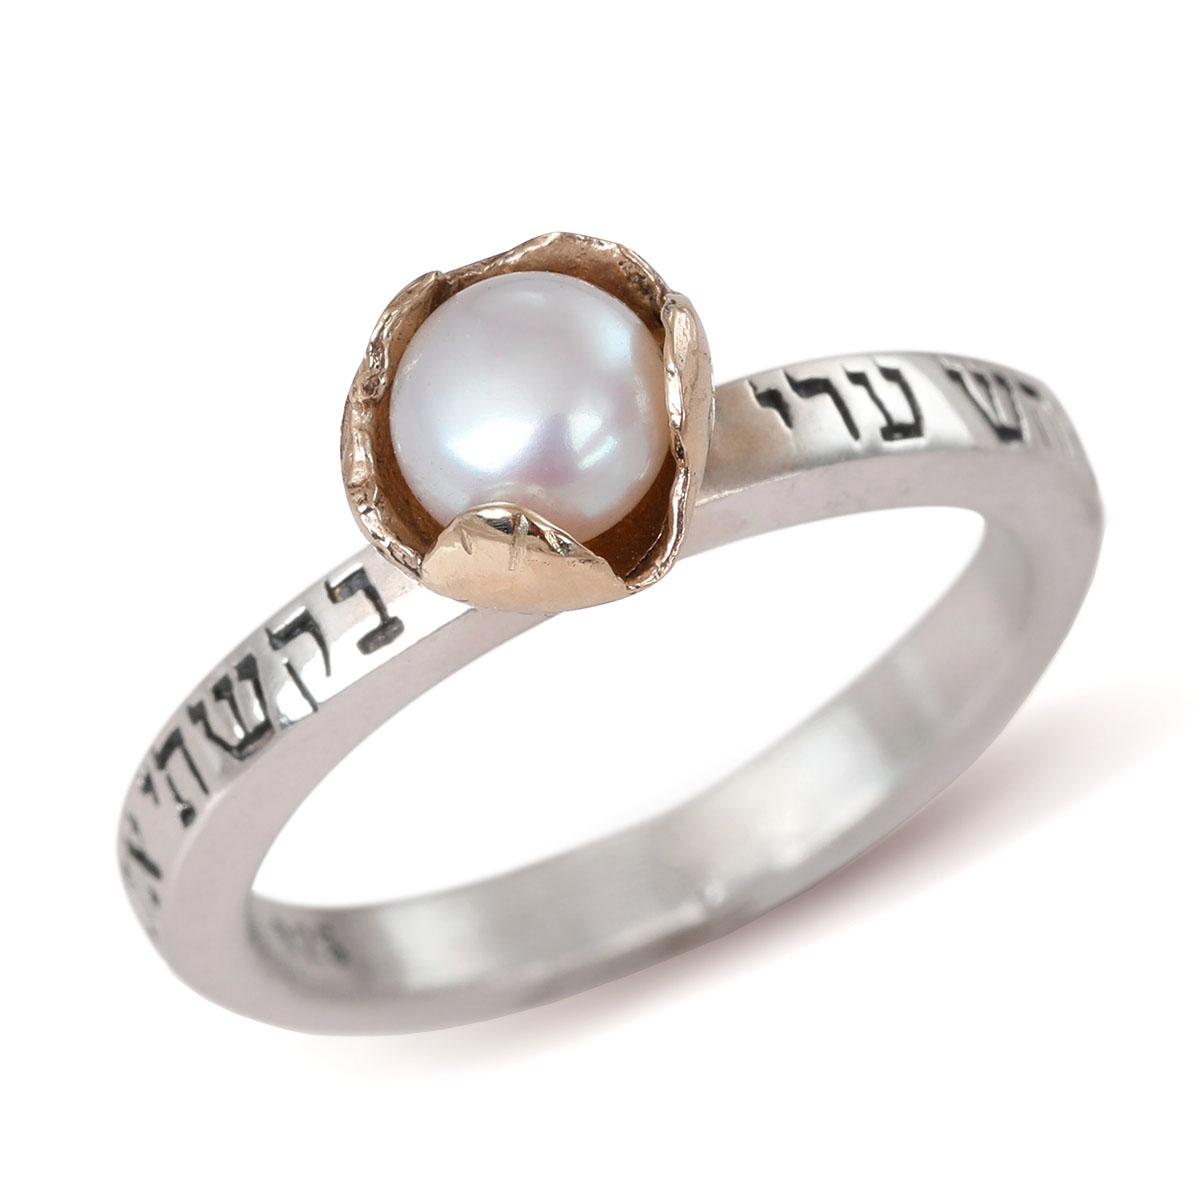 "I Have Sought That Which My Soul Desires": Silver and Gold Kabbalah Ring with Pearl - Song of Songs 3:1 - 1